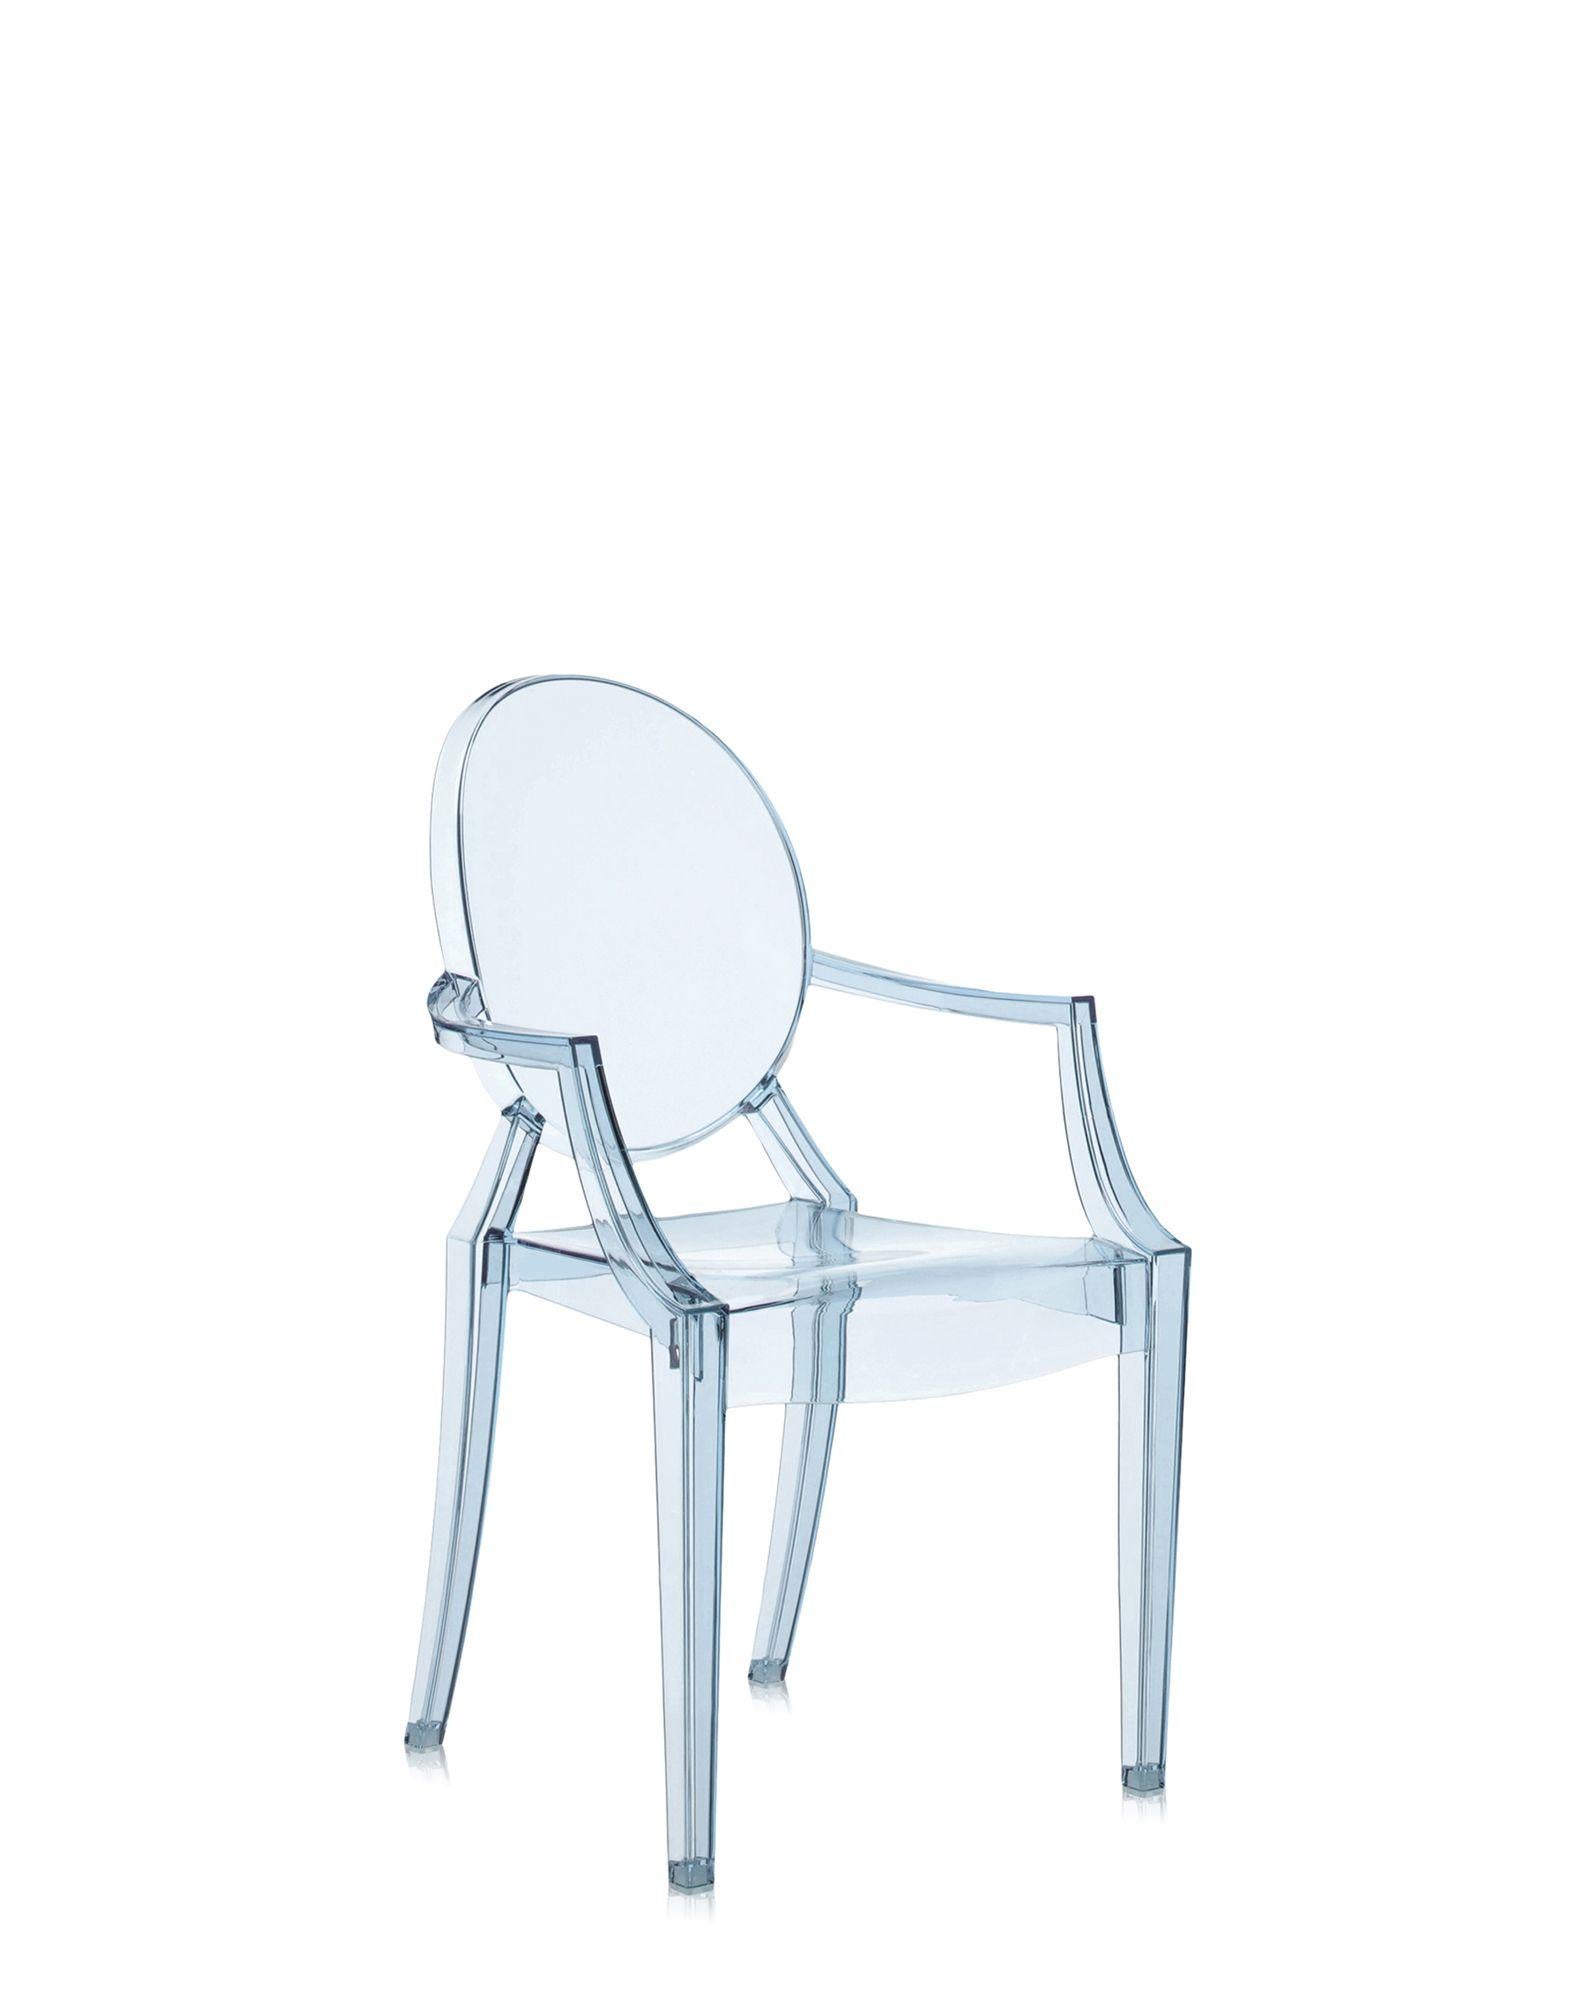 Following the runaway success of Louis Ghost, we’ve created a “baby” version of the famous Starck chair. Lou Lou Ghost inherits its “paternal” classic lines, material, indestructibility and ergonomics and teaches little ones how to use a pint-sized